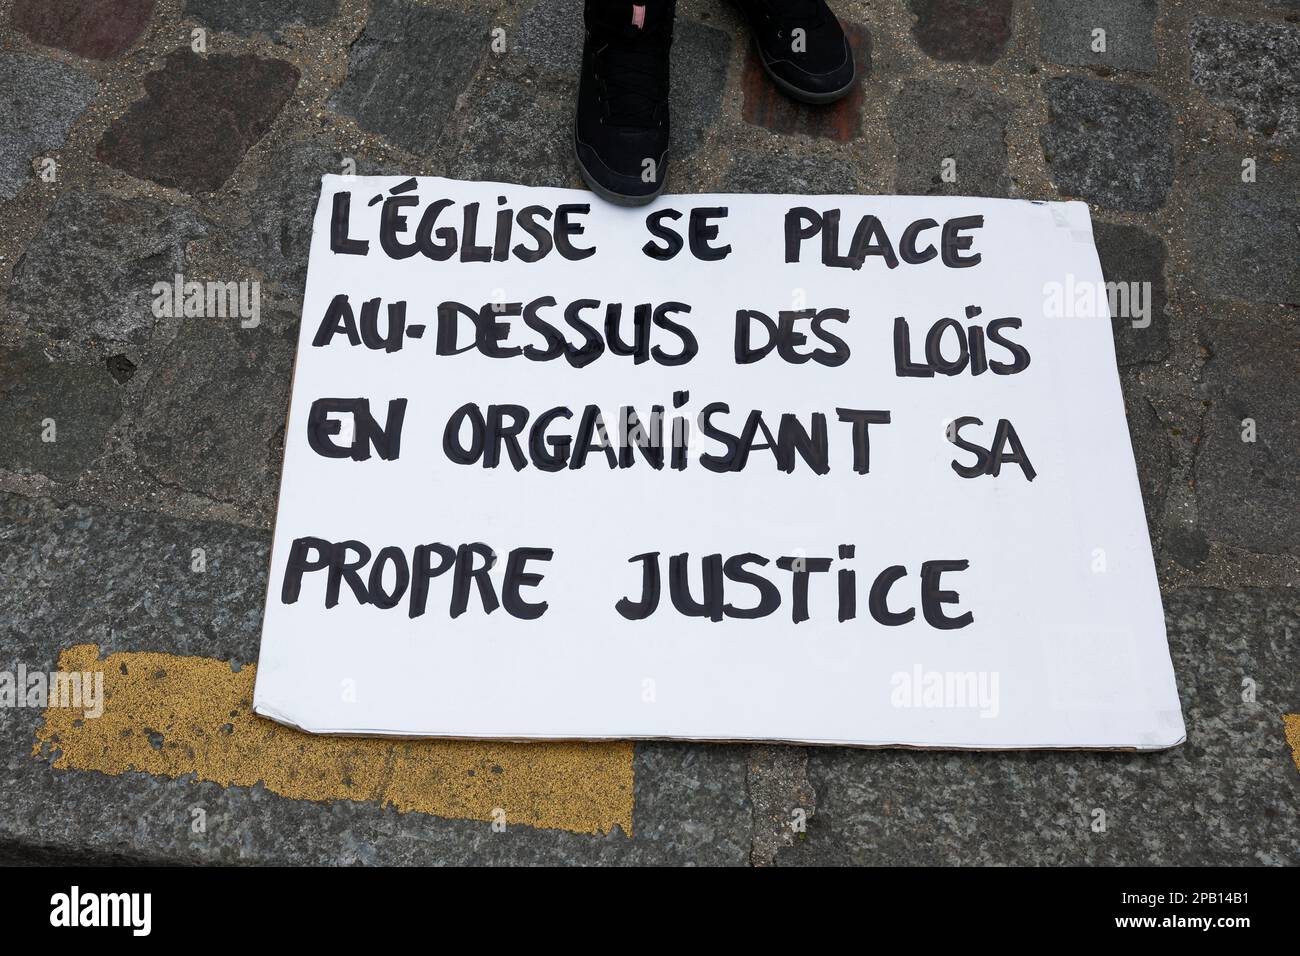 A person participates in a gathering organised by Tous Ensemble and Be Brave France associations to support the victims of sexual abuse by the French Catholic Church, outside the Sacre-Coeur Basilica at the Butte Montmartre in Paris, France, March 12, 2023. The placard reads 'The church places itself above the law by organising its own justice'. REUTERS/Benoit Tessier Stock Photo